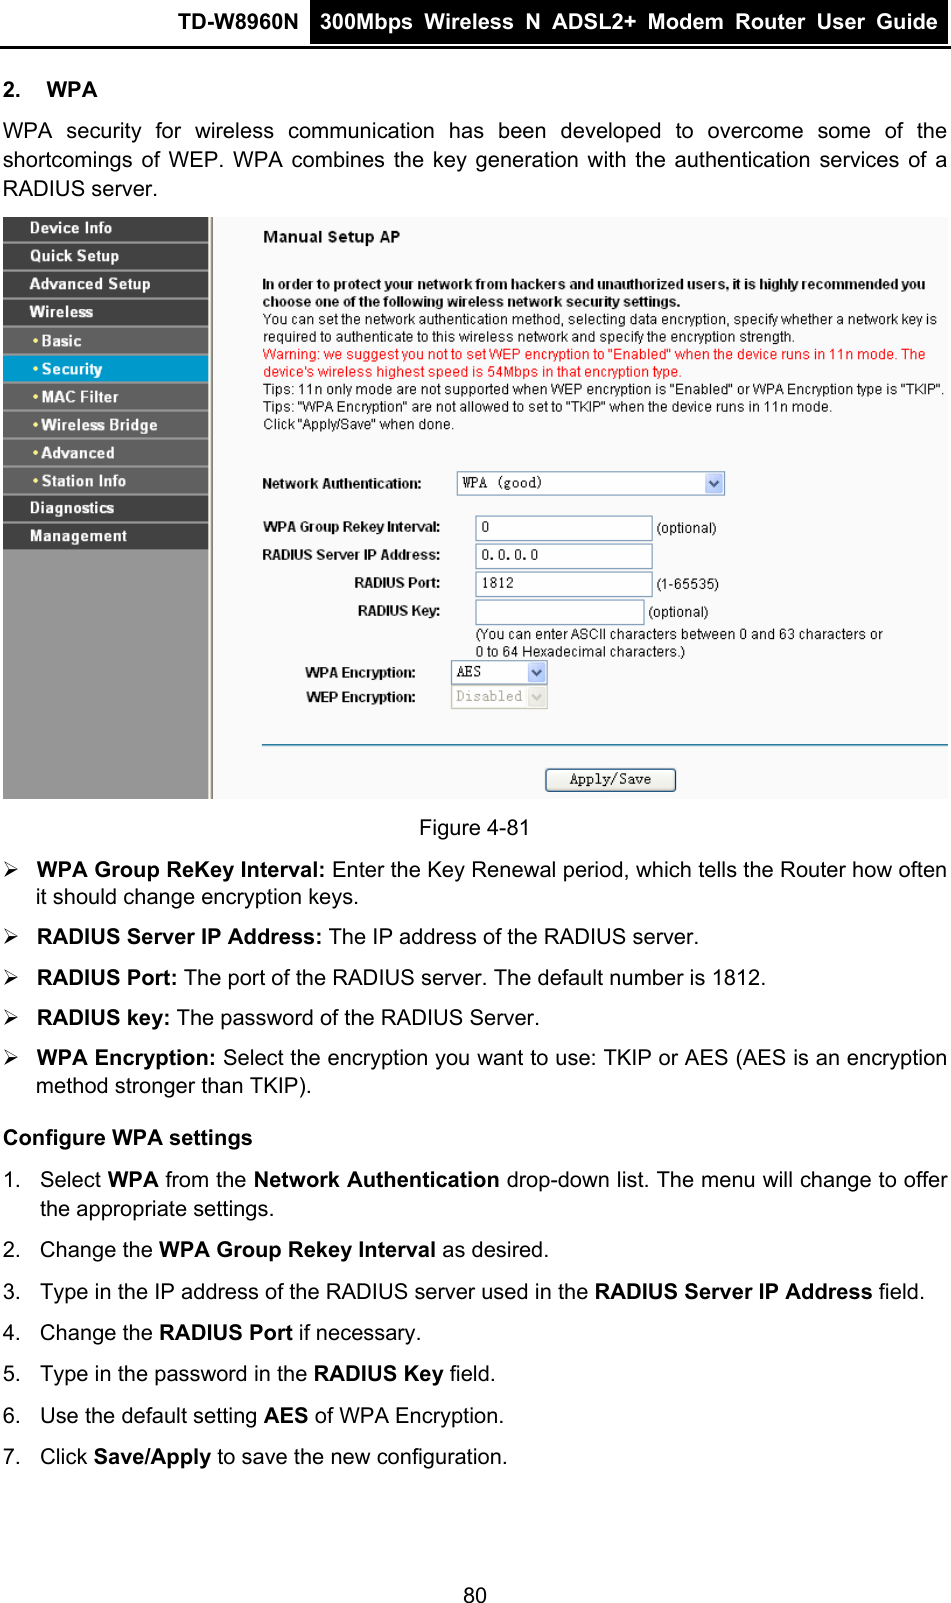 TD-W8960N  300Mbps Wireless N ADSL2+ Modem Router User Guide  2. WPA WPA security for wireless communication has been developed to overcome some of the shortcomings of WEP. WPA combines the key generation with the authentication services of a RADIUS server.  Figure 4-81 ¾ WPA Group ReKey Interval: Enter the Key Renewal period, which tells the Router how often it should change encryption keys. ¾ RADIUS Server IP Address: The IP address of the RADIUS server. ¾ RADIUS Port: The port of the RADIUS server. The default number is 1812. ¾ RADIUS key: The password of the RADIUS Server. ¾ WPA Encryption: Select the encryption you want to use: TKIP or AES (AES is an encryption method stronger than TKIP). Configure WPA settings 1. Select WPA from the Network Authentication drop-down list. The menu will change to offer the appropriate settings. 2. Change the WPA Group Rekey Interval as desired. 3.  Type in the IP address of the RADIUS server used in the RADIUS Server IP Address field. 4. Change the RADIUS Port if necessary. 5.  Type in the password in the RADIUS Key field. 6.  Use the default setting AES of WPA Encryption. 7. Click Save/Apply to save the new configuration. 80 